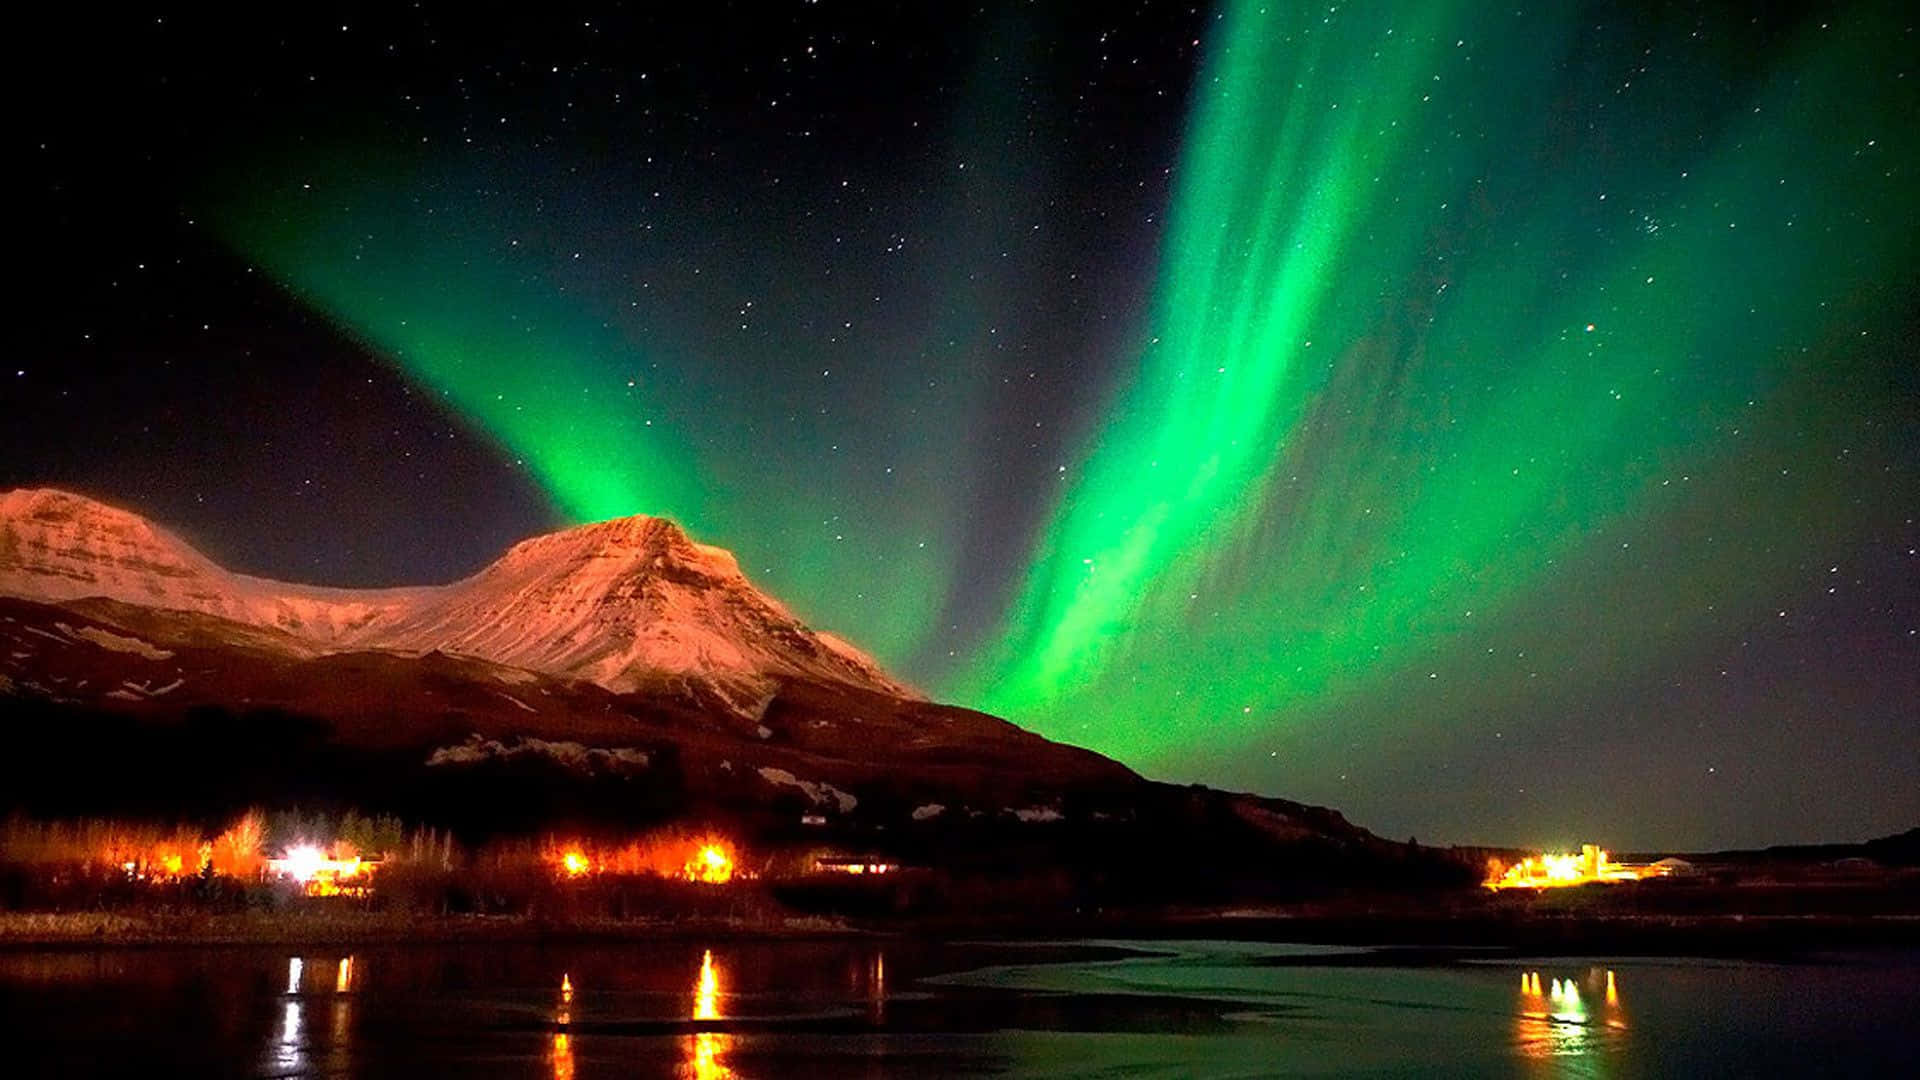 An ethereal sight of the Northern Lights above a breathtaking landscape.